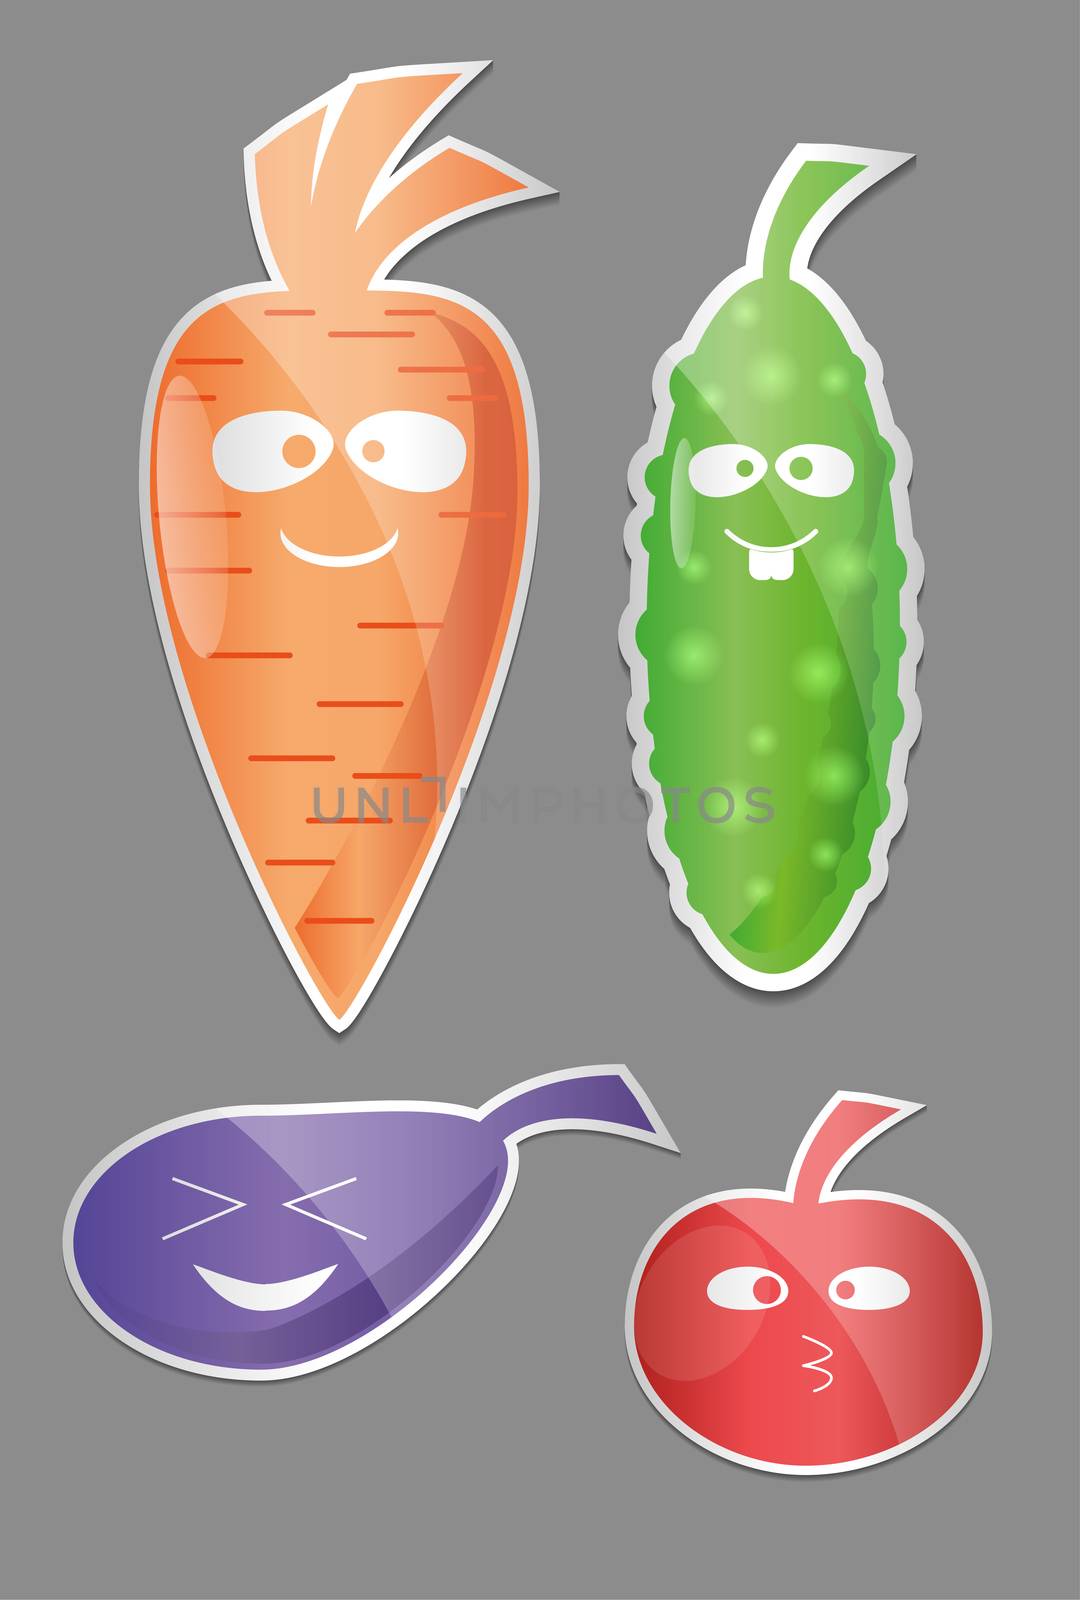 Vegetable icon set. Labels with Vegetables. Carrot, cucumber, tomato, eggplant Flat style. by Adamchuk